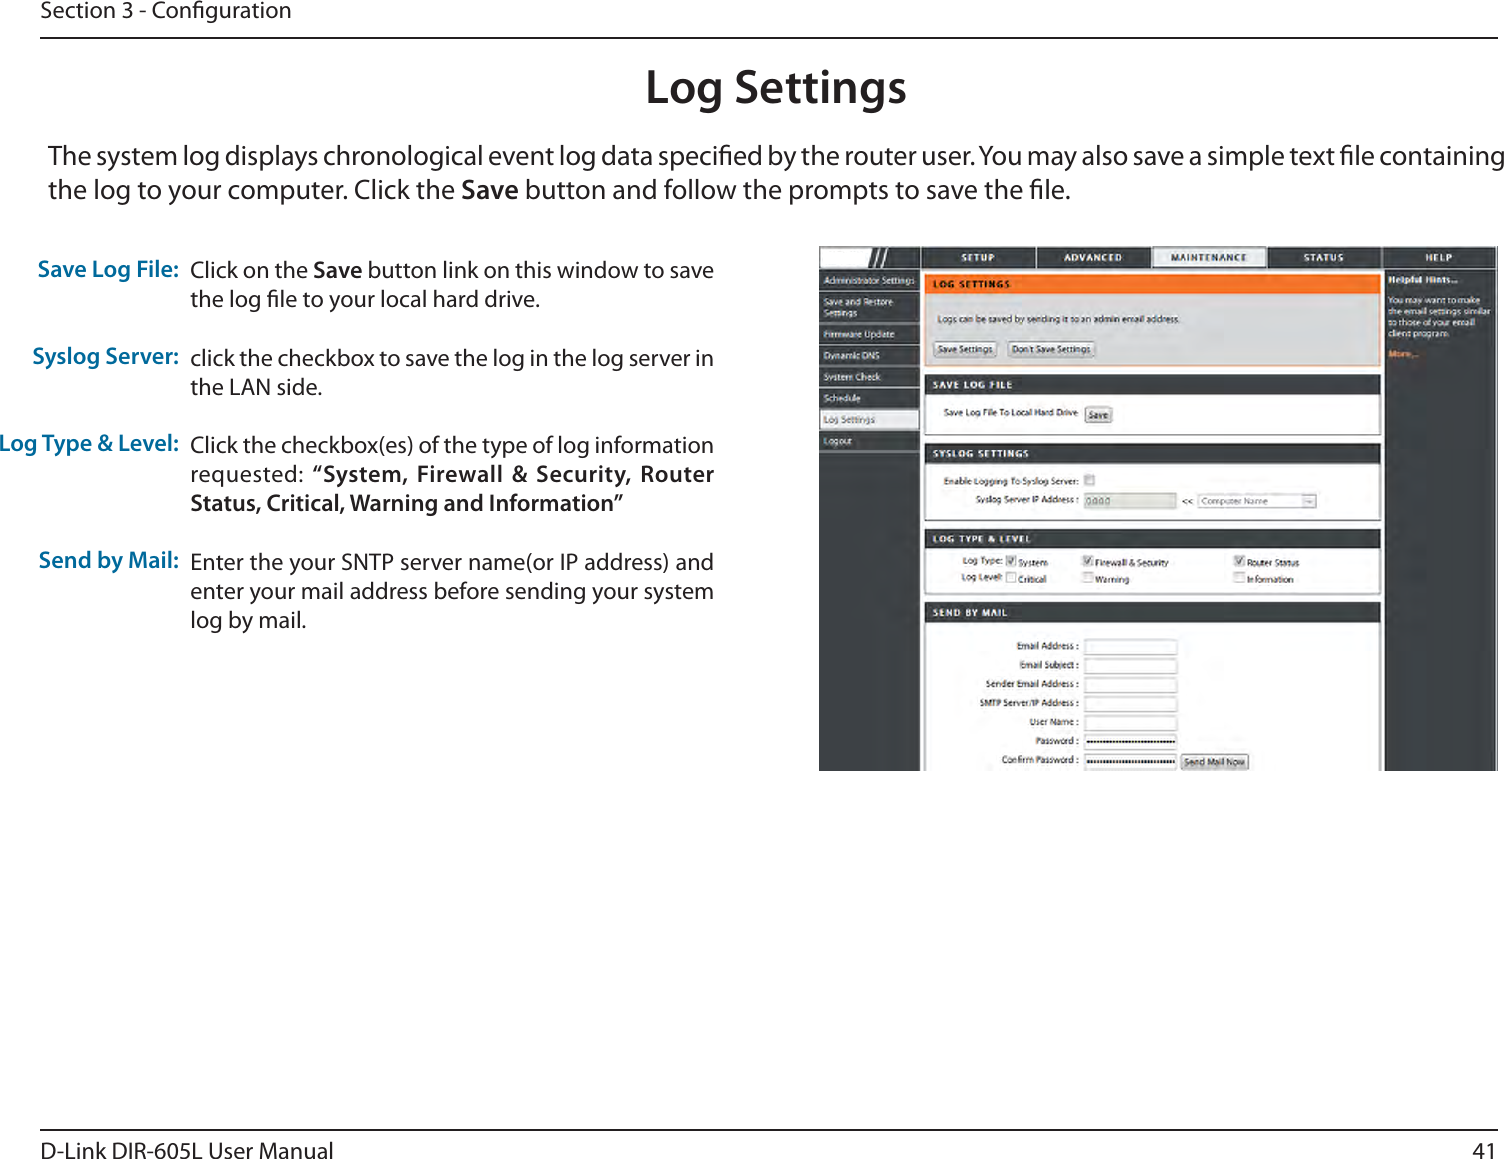 41D-Link DIR-605L User ManualSection 3 - CongurationLog SettingsClick on the Save button link on this window to save the log le to your local hard drive.click the checkbox to save the log in the log server in the LAN side.Click the checkbox(es) of the type of log information requested: i4ZTUFN&apos;JSFXBMM 4FDVSJUZ 3PVUFS4UBUVT$SJUJDBM8BSOJOHBOE*OGPSNBUJPOwEnter the your SNTP server name(or IP address) and enter your mail address before sending your system log by mail.4BWF-PH&apos;JMFSyslog Server:-PH5ZQF-FWFMSend by Mail:The system log displays chronological event log data specied by the router user. You may also save a simple text le containing the log to your computer. Click the Save button and follow the prompts to save the le.DIR-605L